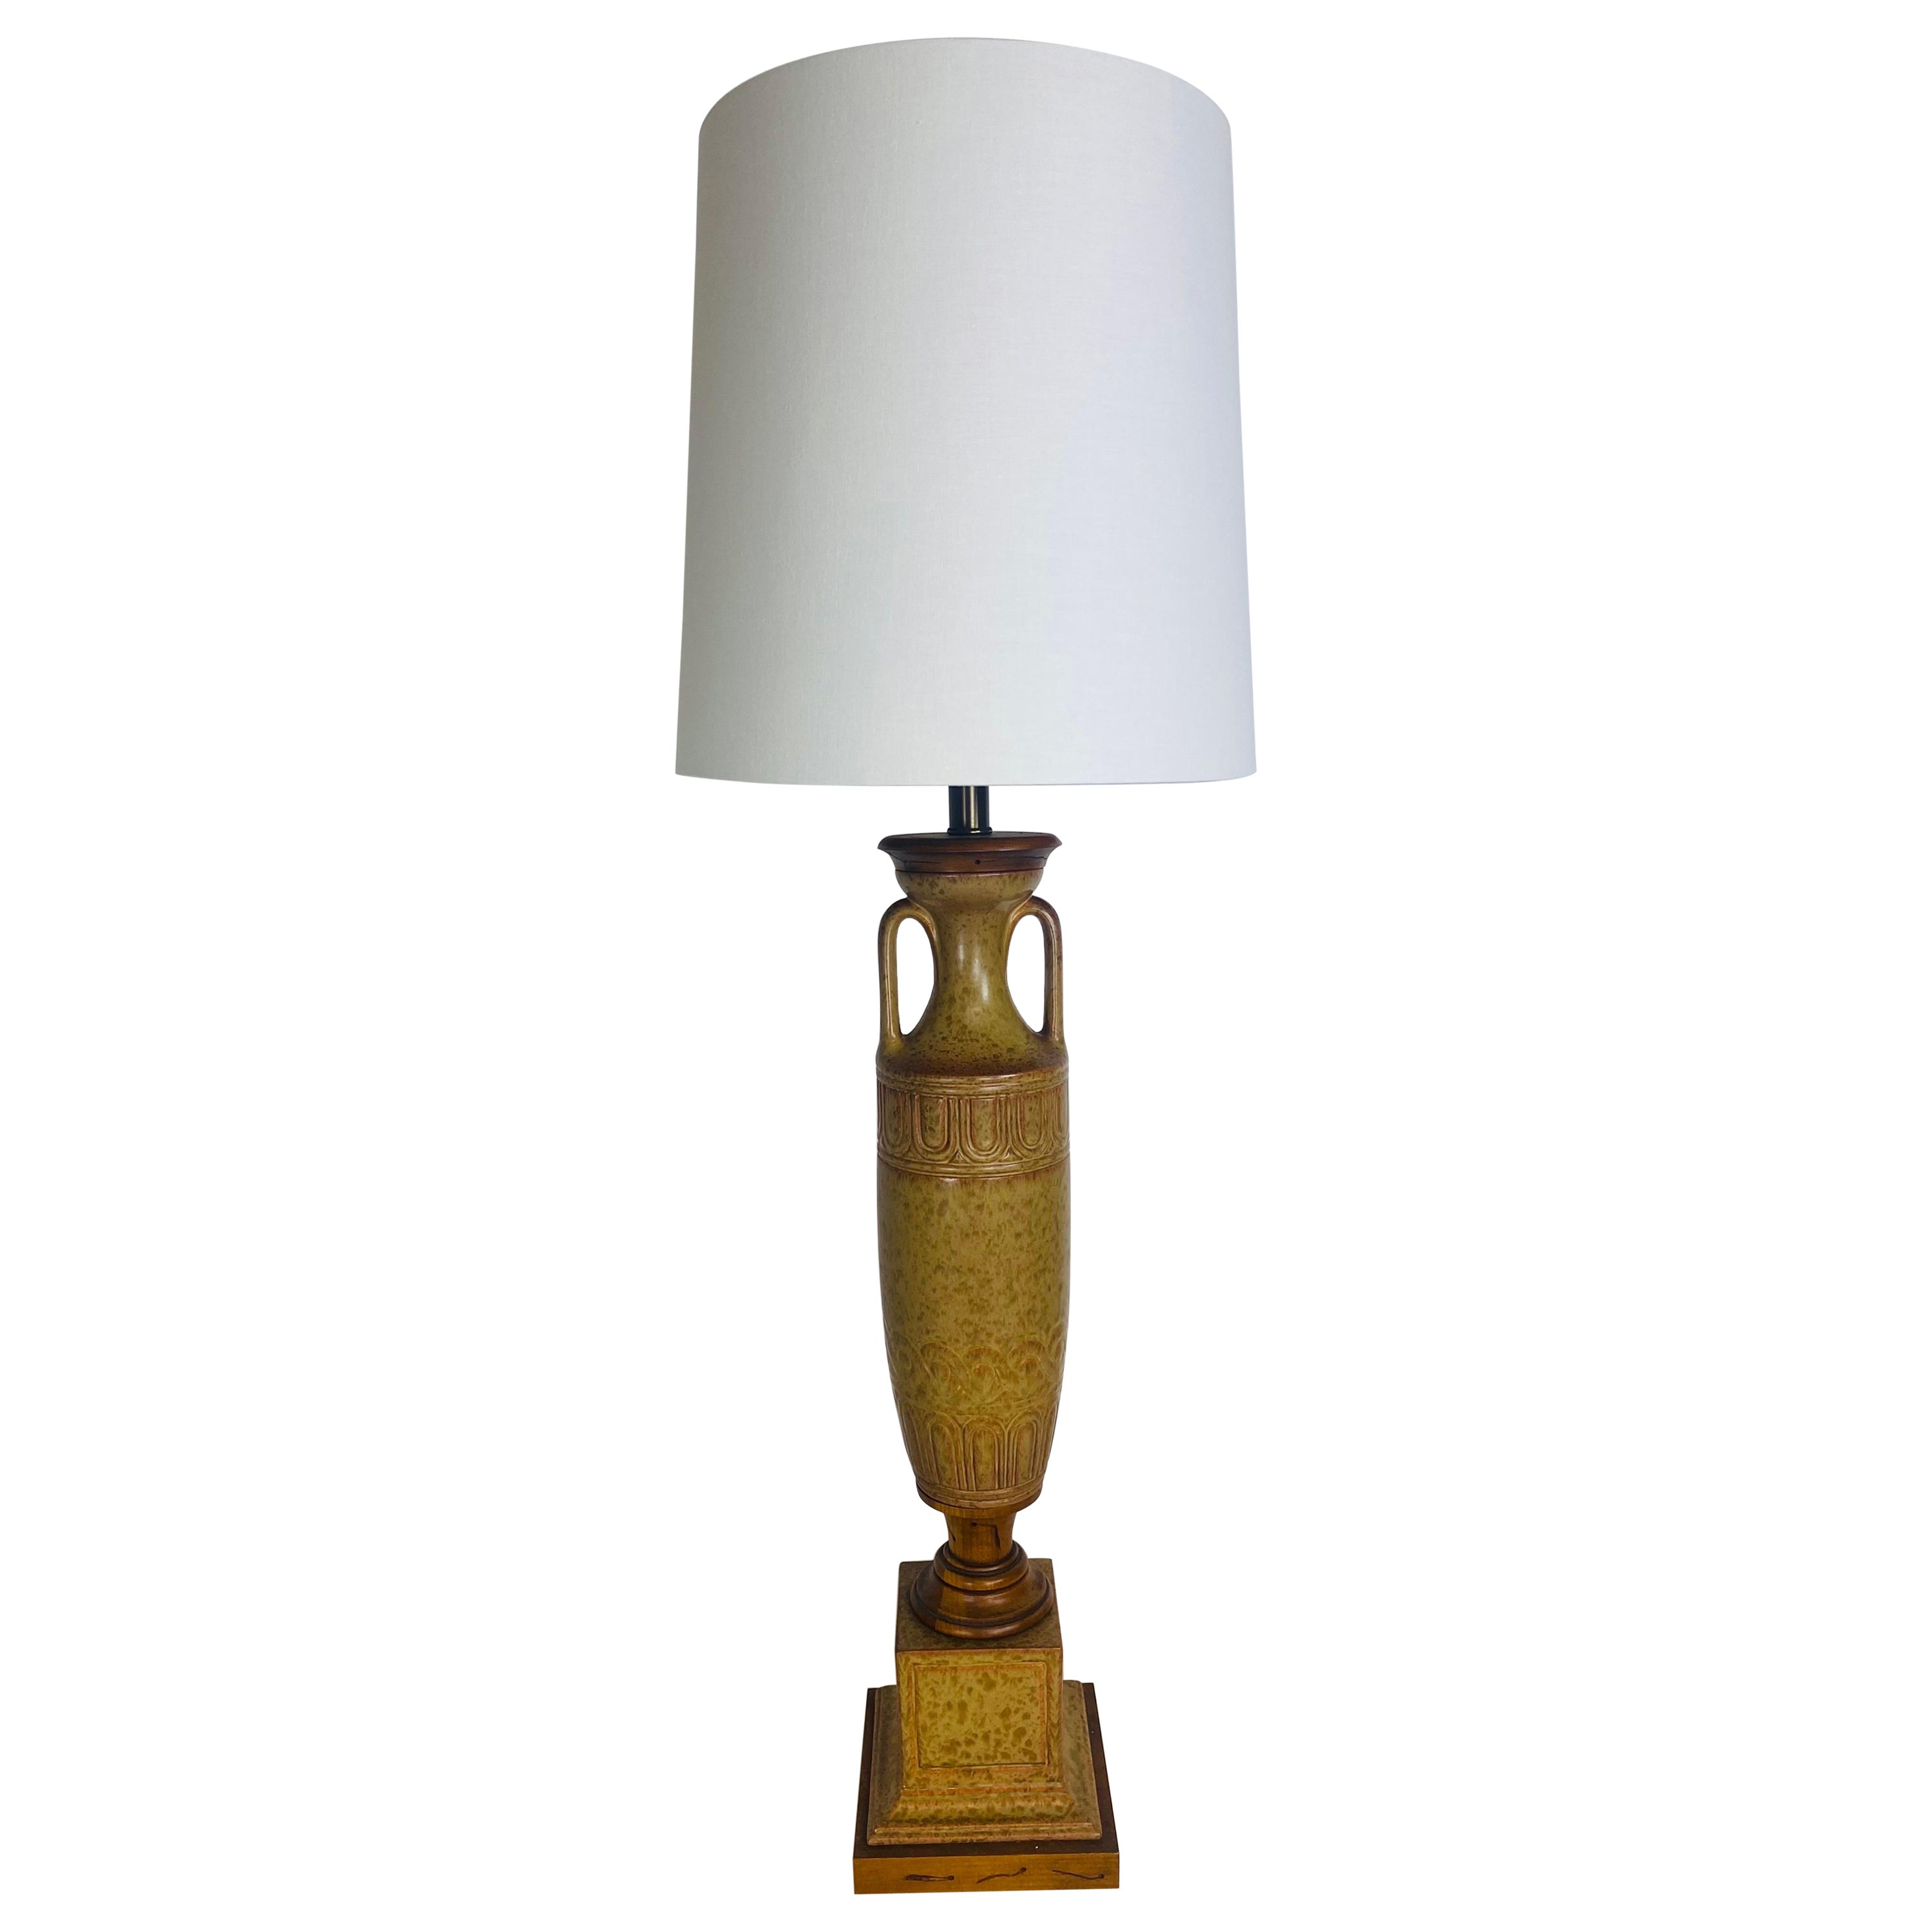 Handsome mid century classical revival decorator pottery table lamp